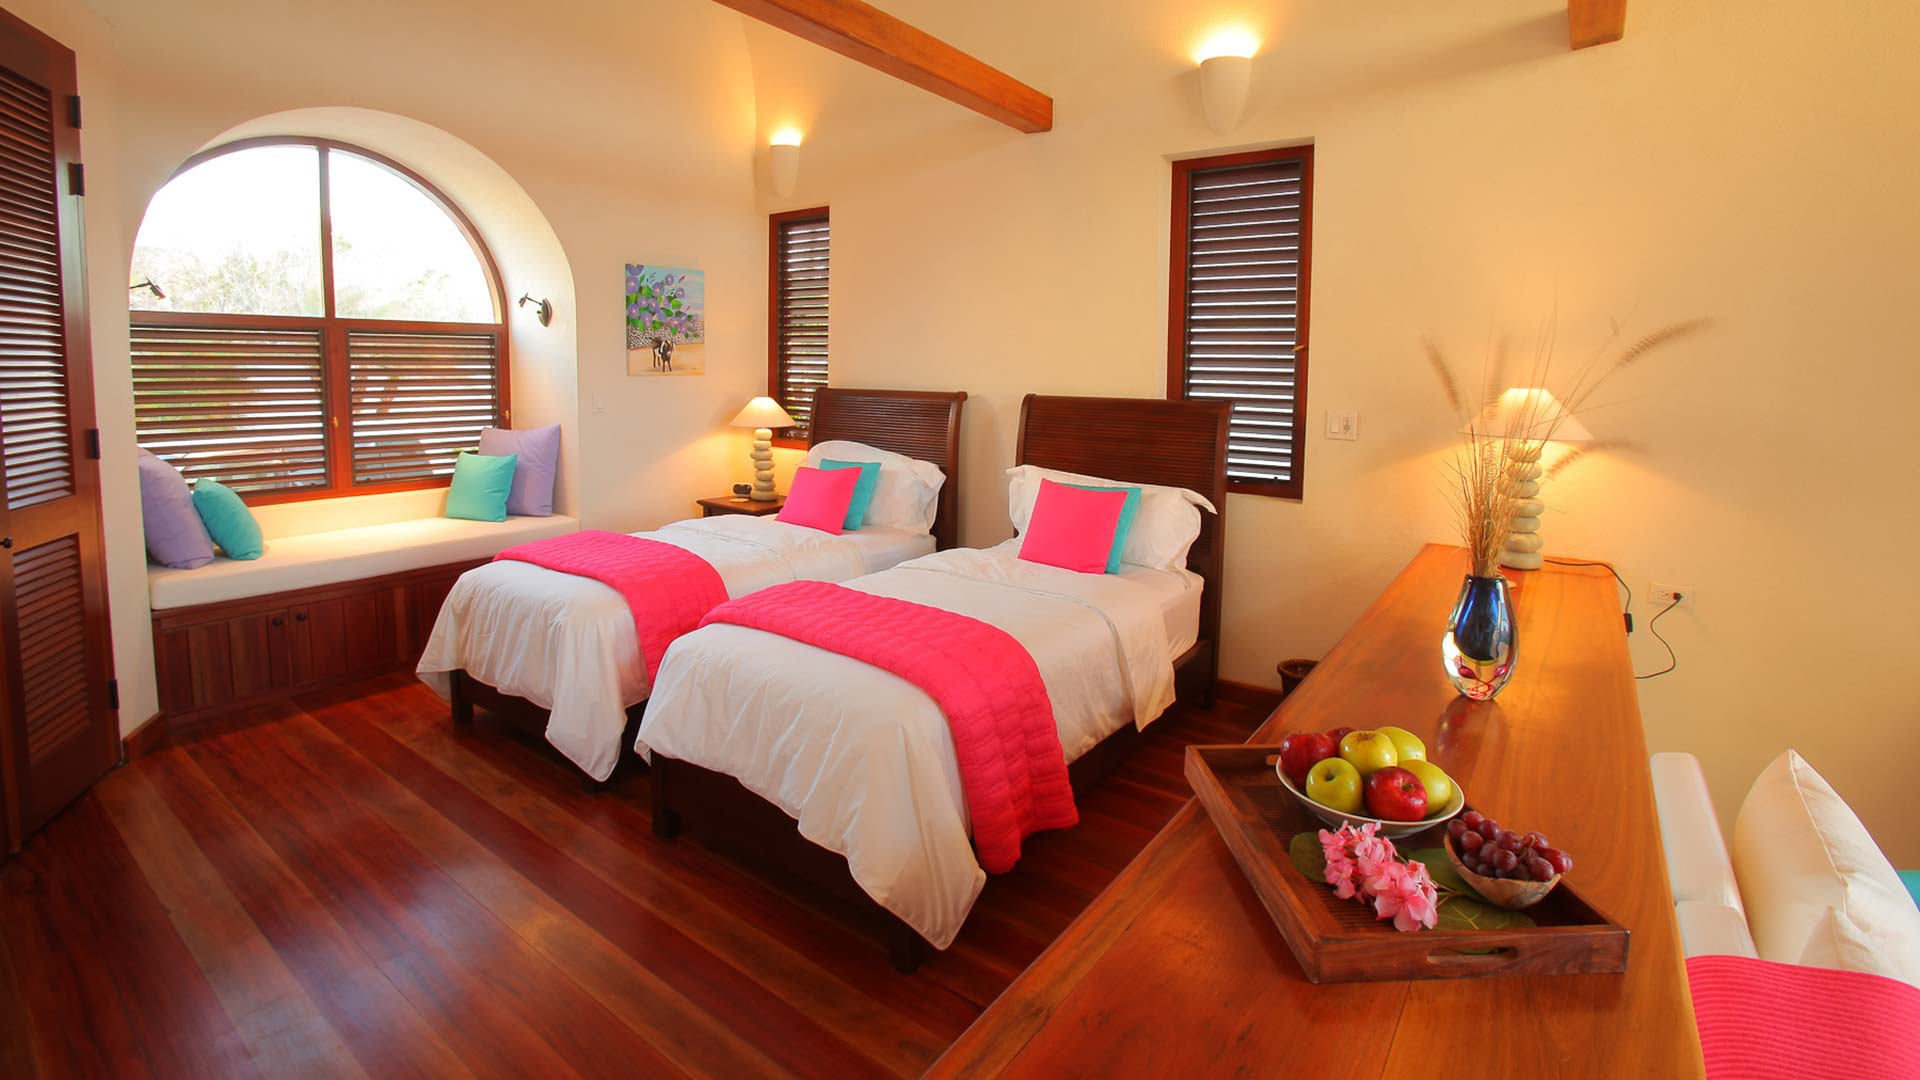 A suite with two double beds at Black Pearl.